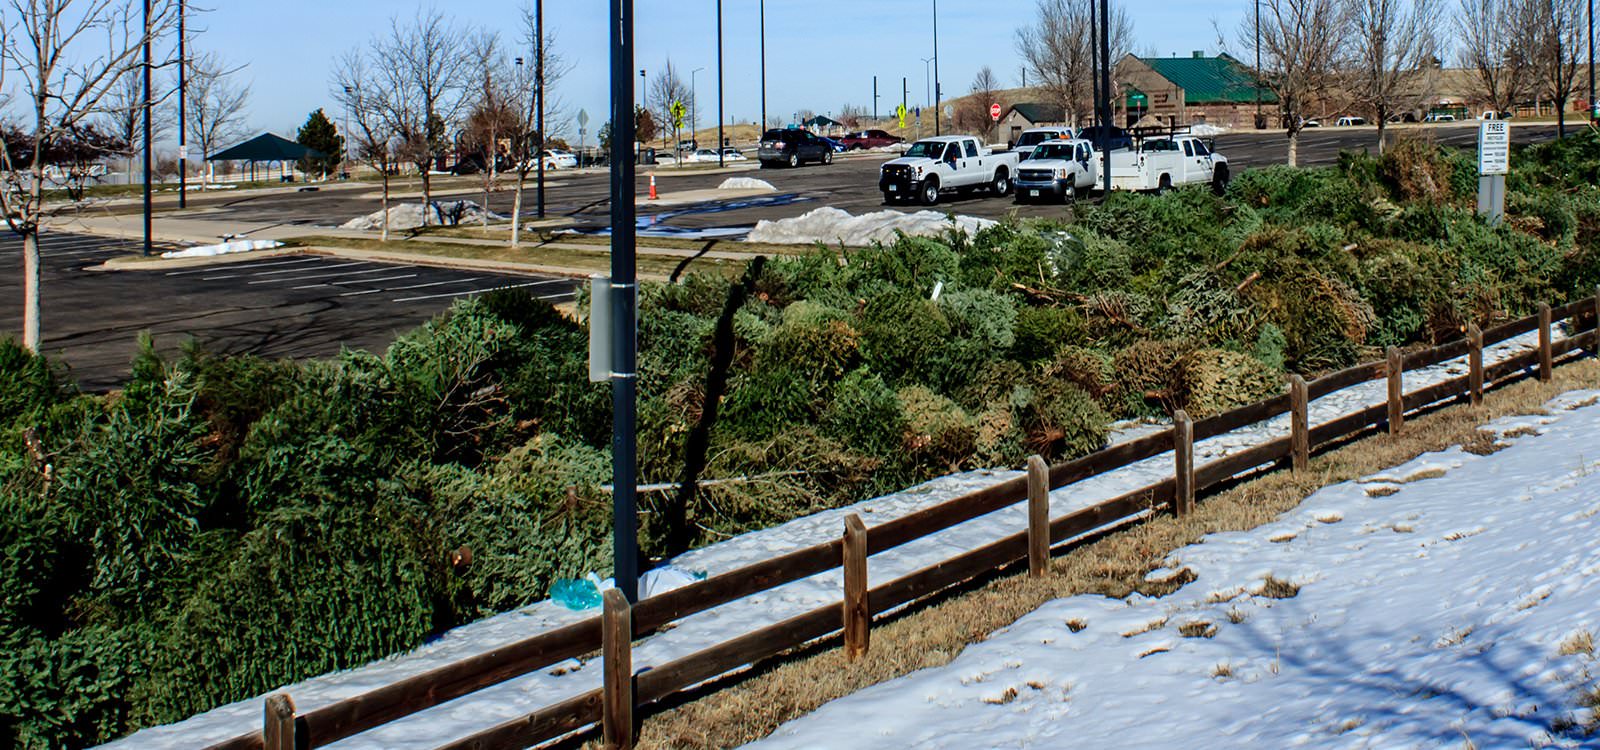 christmas trees piled in parking lot to be recycled through the wood chipper at Challenger Park in Parker